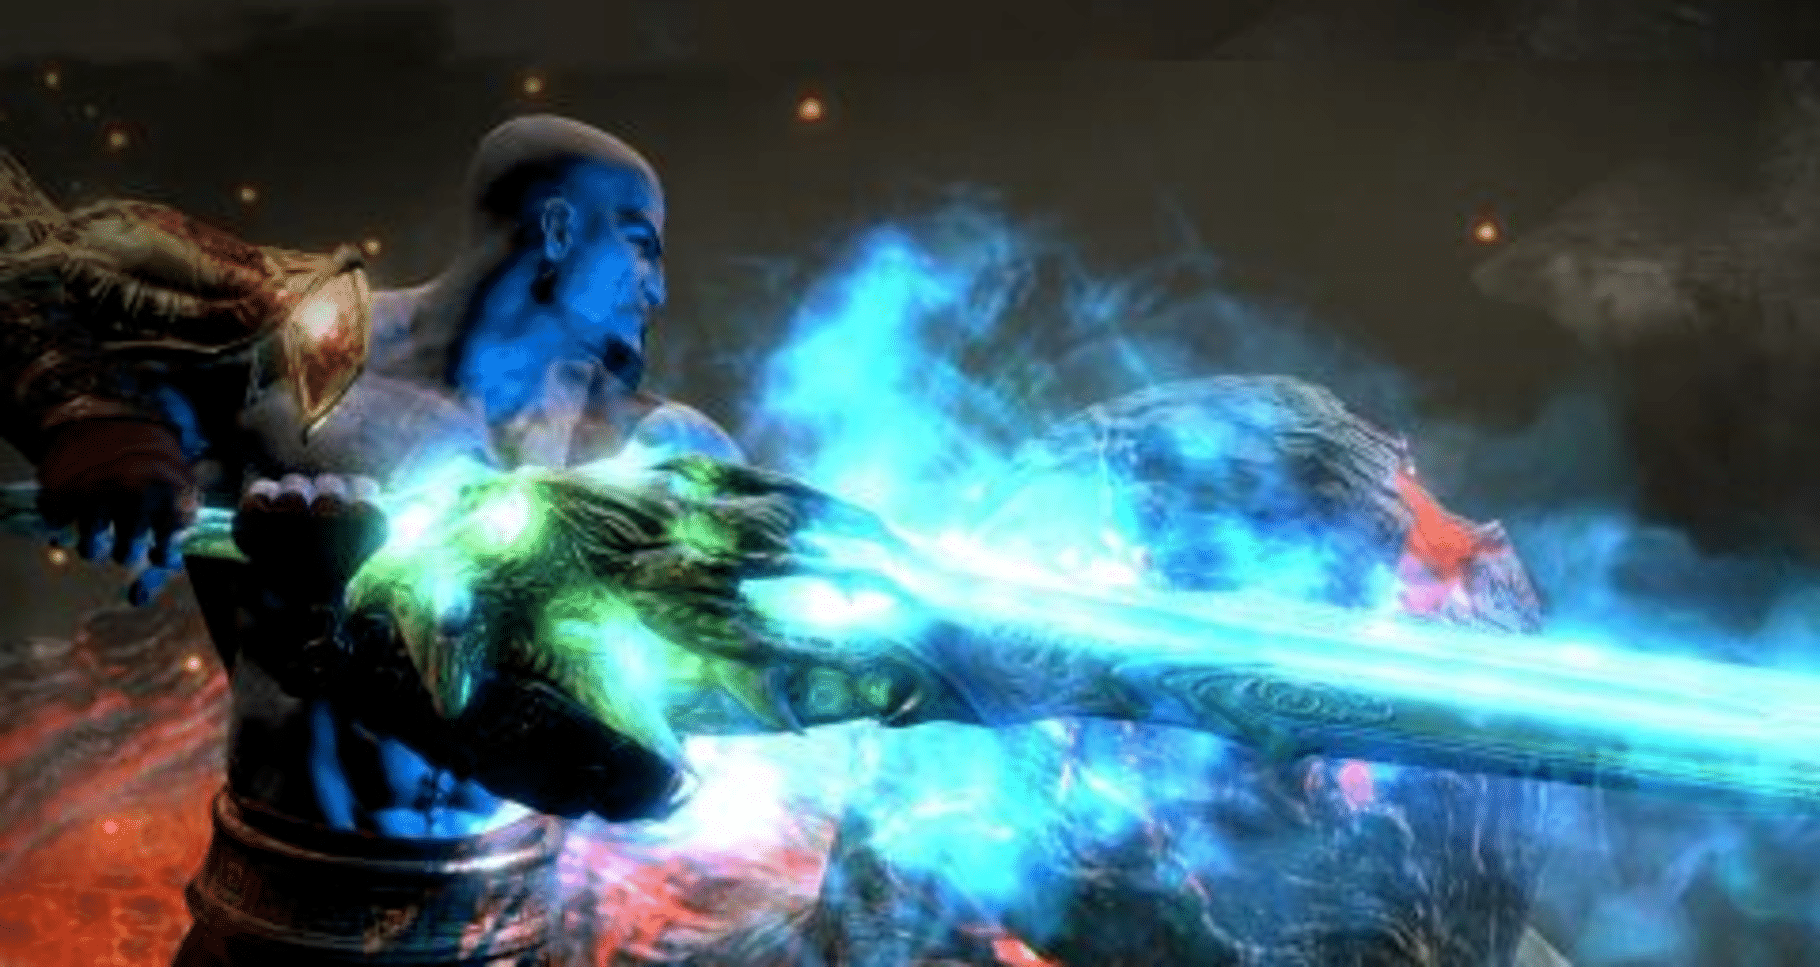 Games reviews round-up: God of War 3 Remastered; Rare Replay; King's Quest, Role playing games